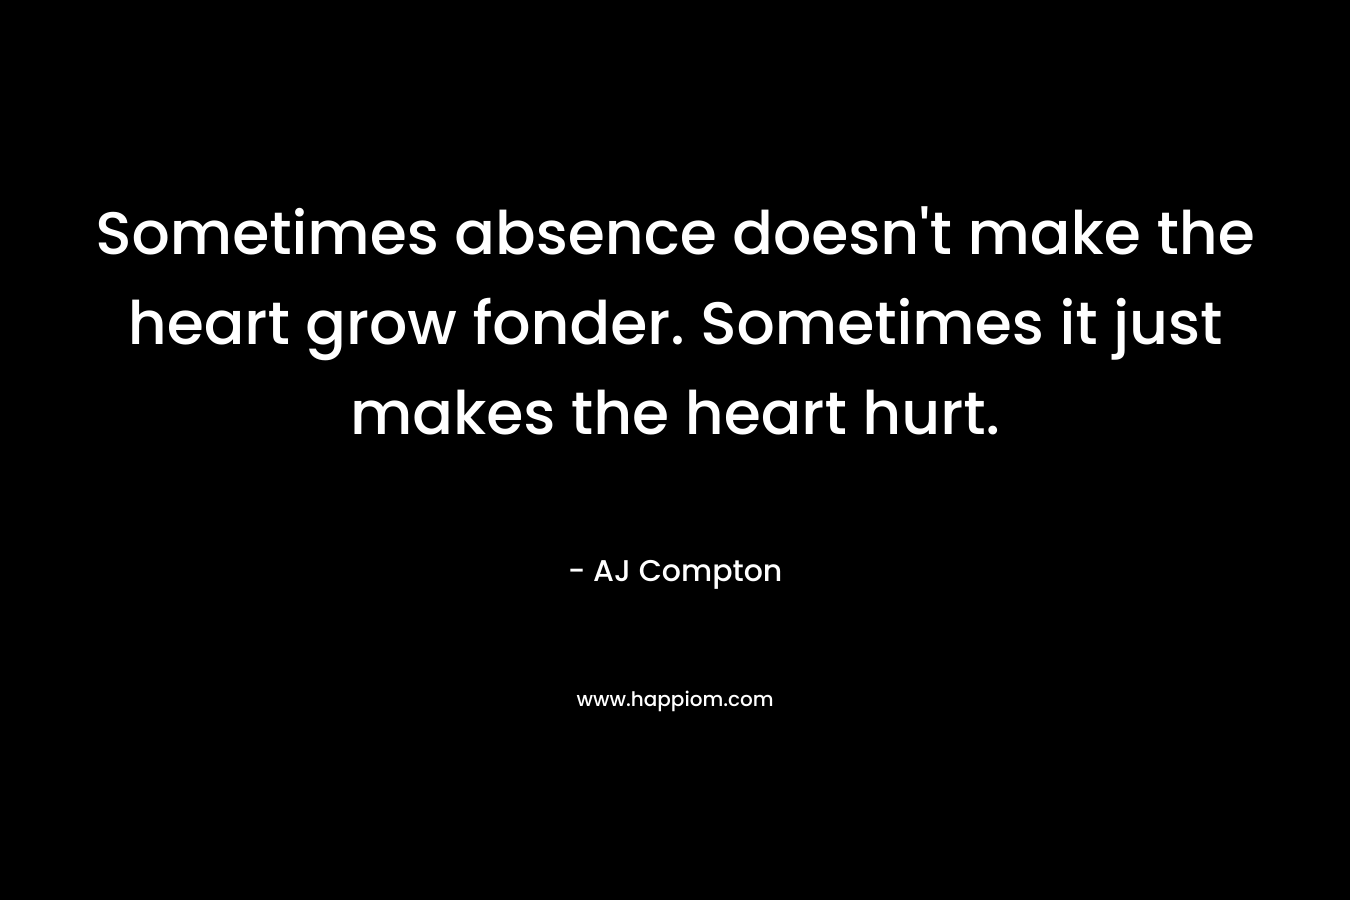 Sometimes absence doesn't make the heart grow fonder. Sometimes it just makes the heart hurt.